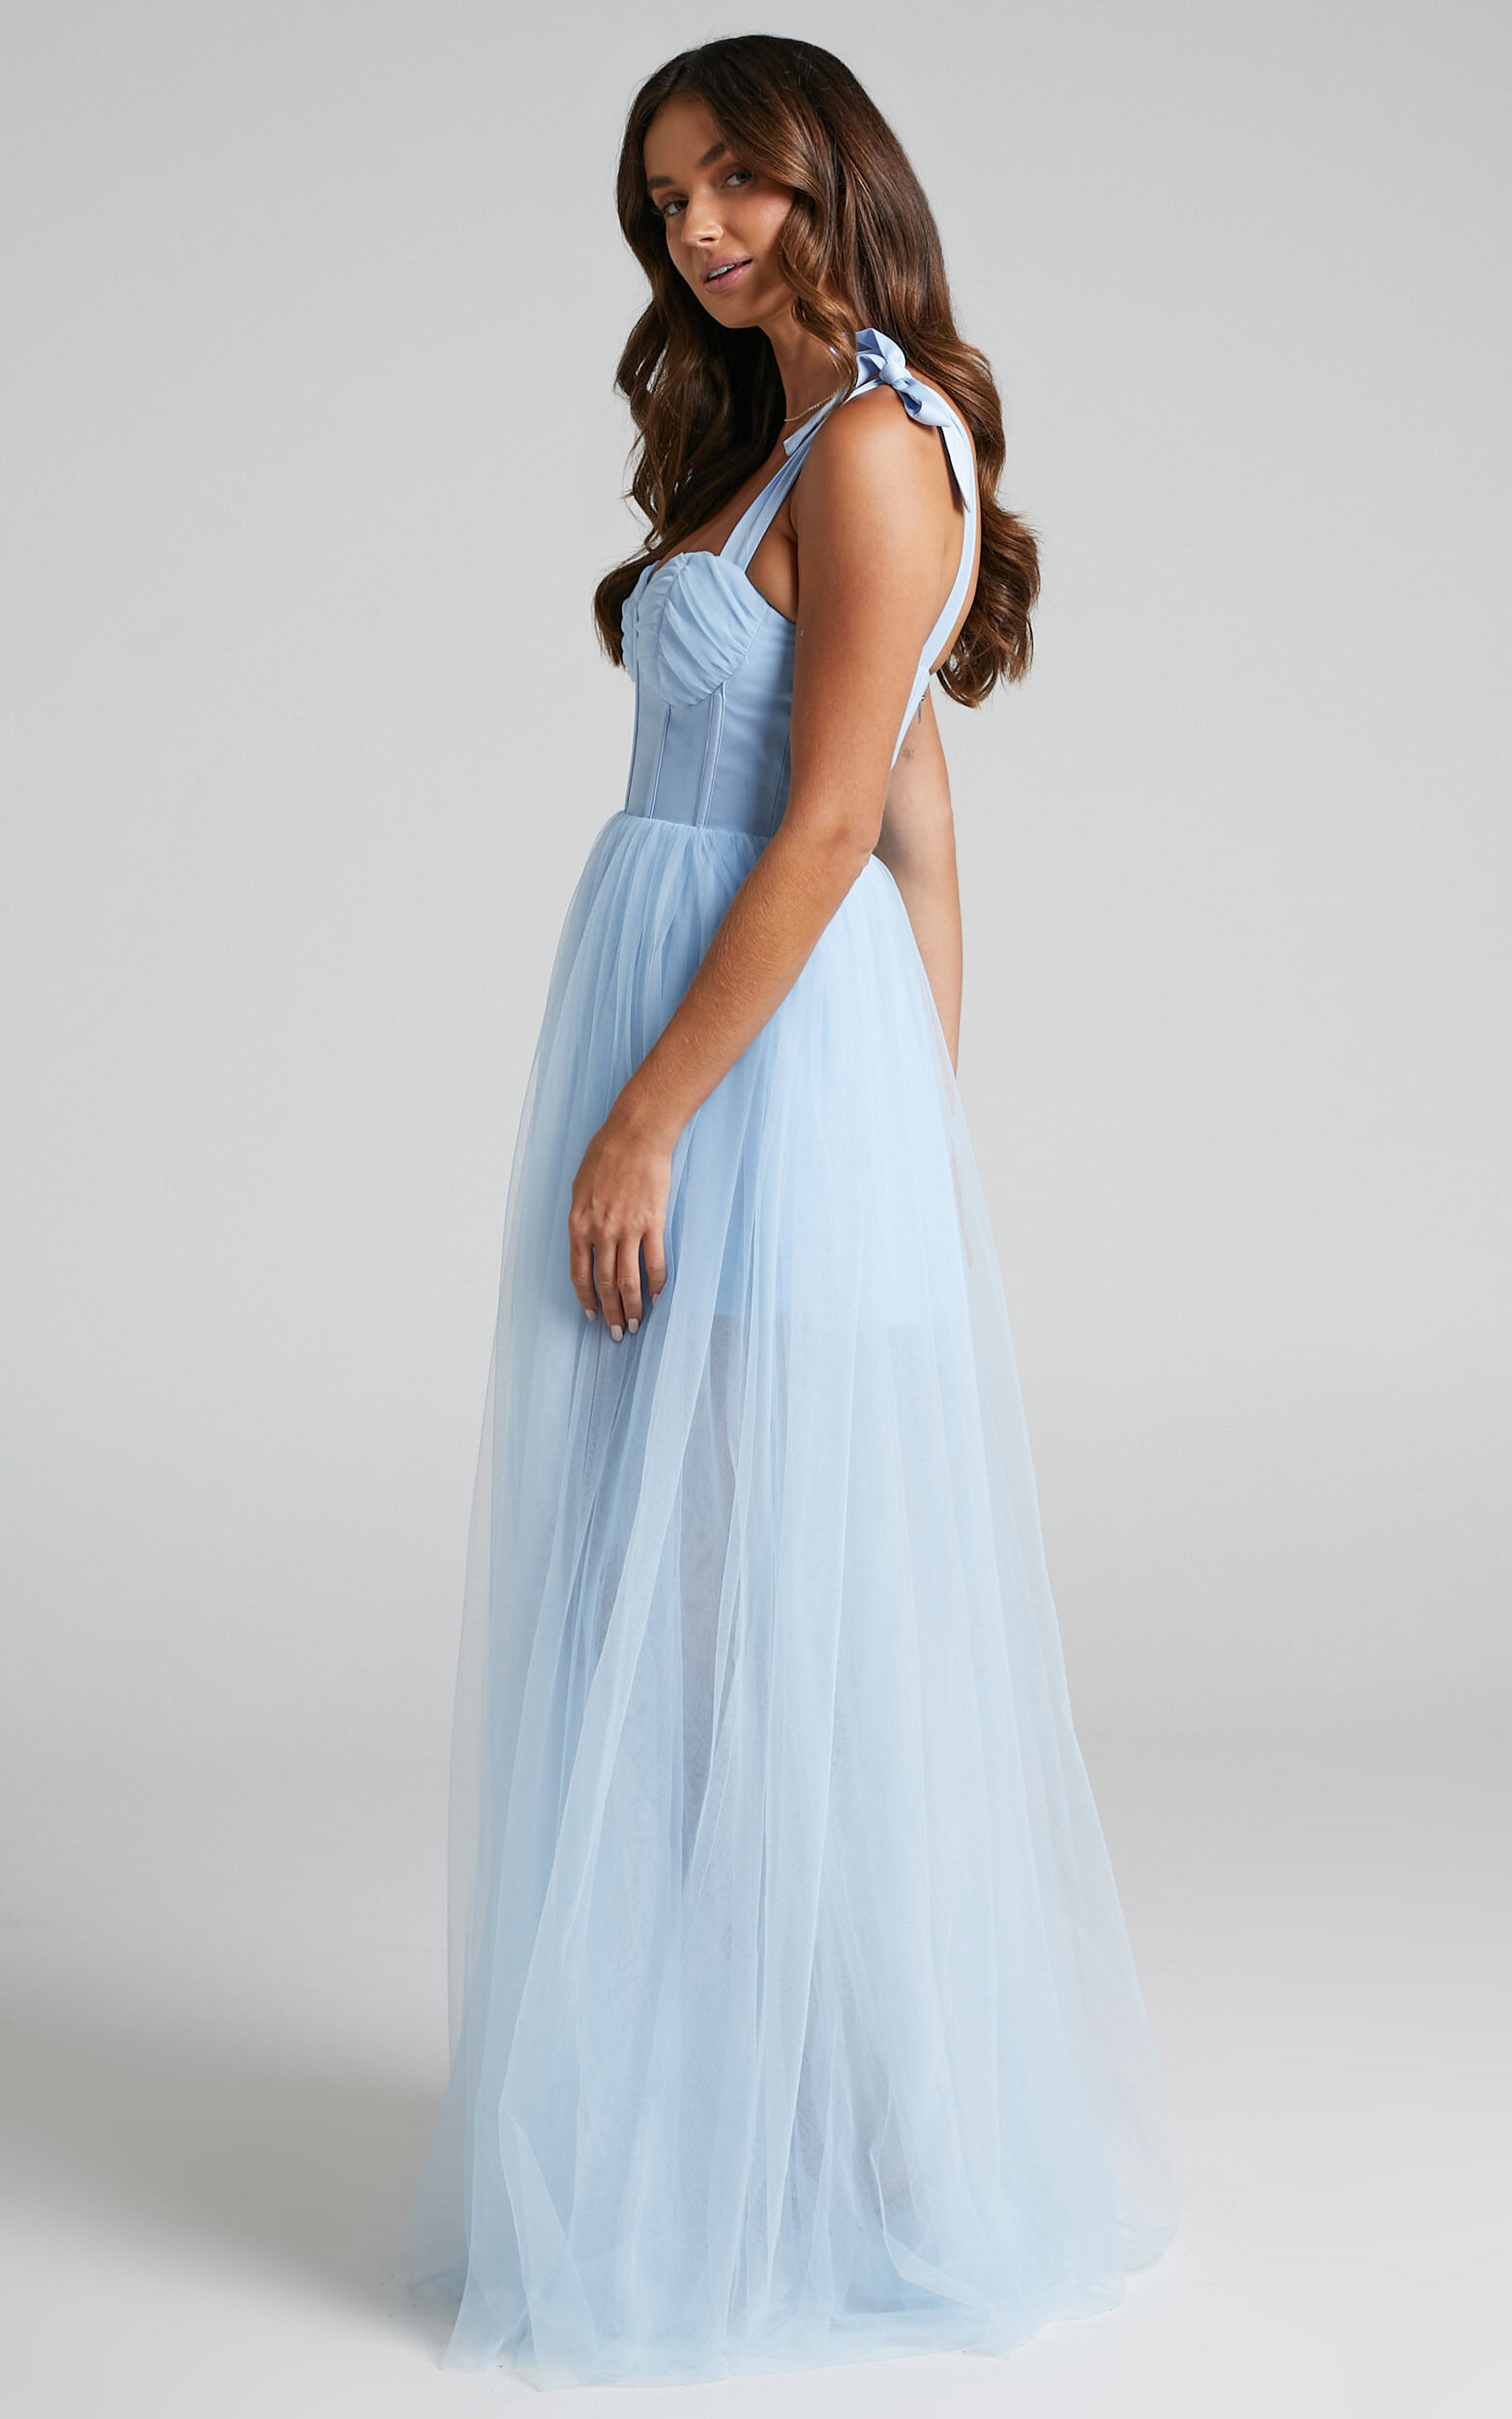 https://images.showpo.com/dw/image/v2/BDPQ_PRD/on/demandware.static/-/Sites-sp-master-catalog/default/dwd2b84643/images/emmary-tulle-maxi-gown/6_-_Emmary_Bustier_Bodice_Tulle_Gown_in_Pale_Blue_2528SD21100090032529_5.jpg?sw=1563&sh=2500